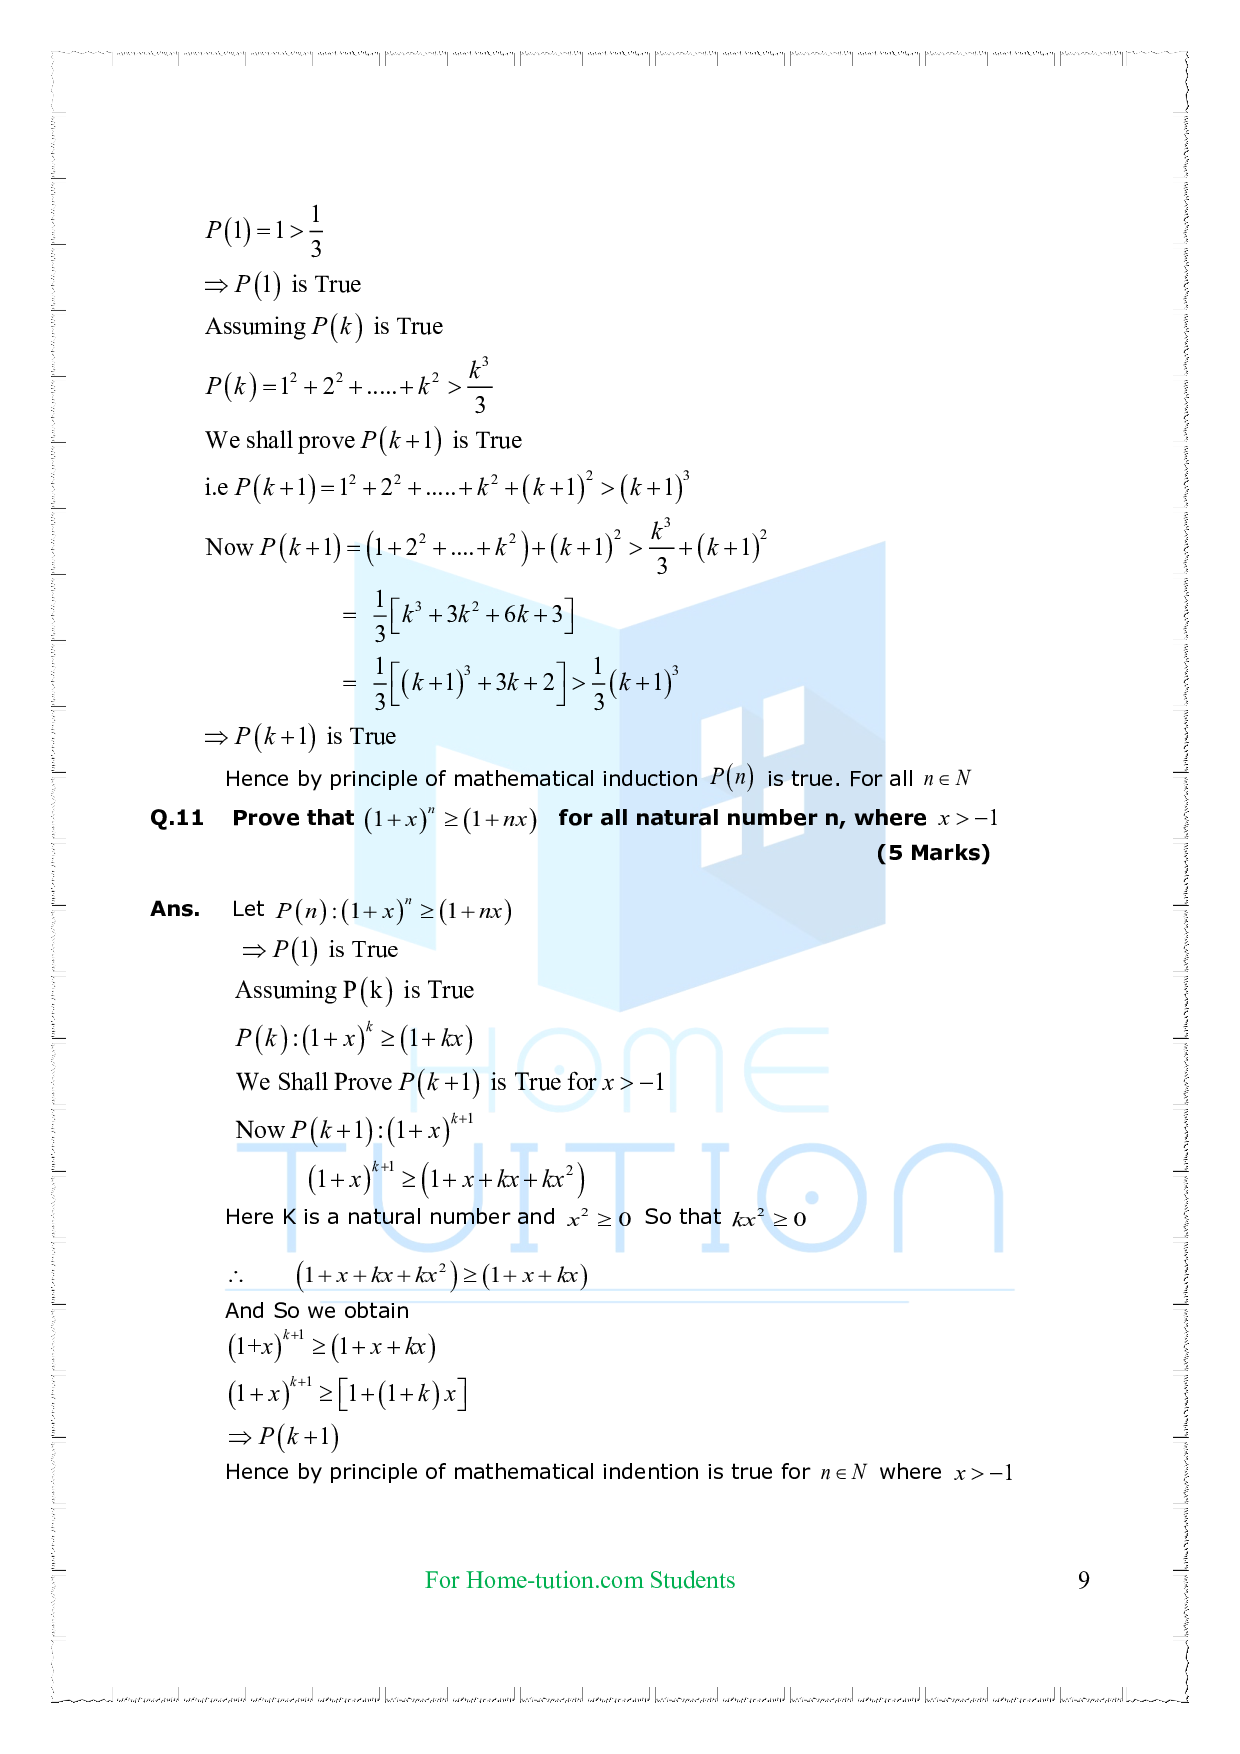 Chapter 4 Principle of Mathematical Induction Questions